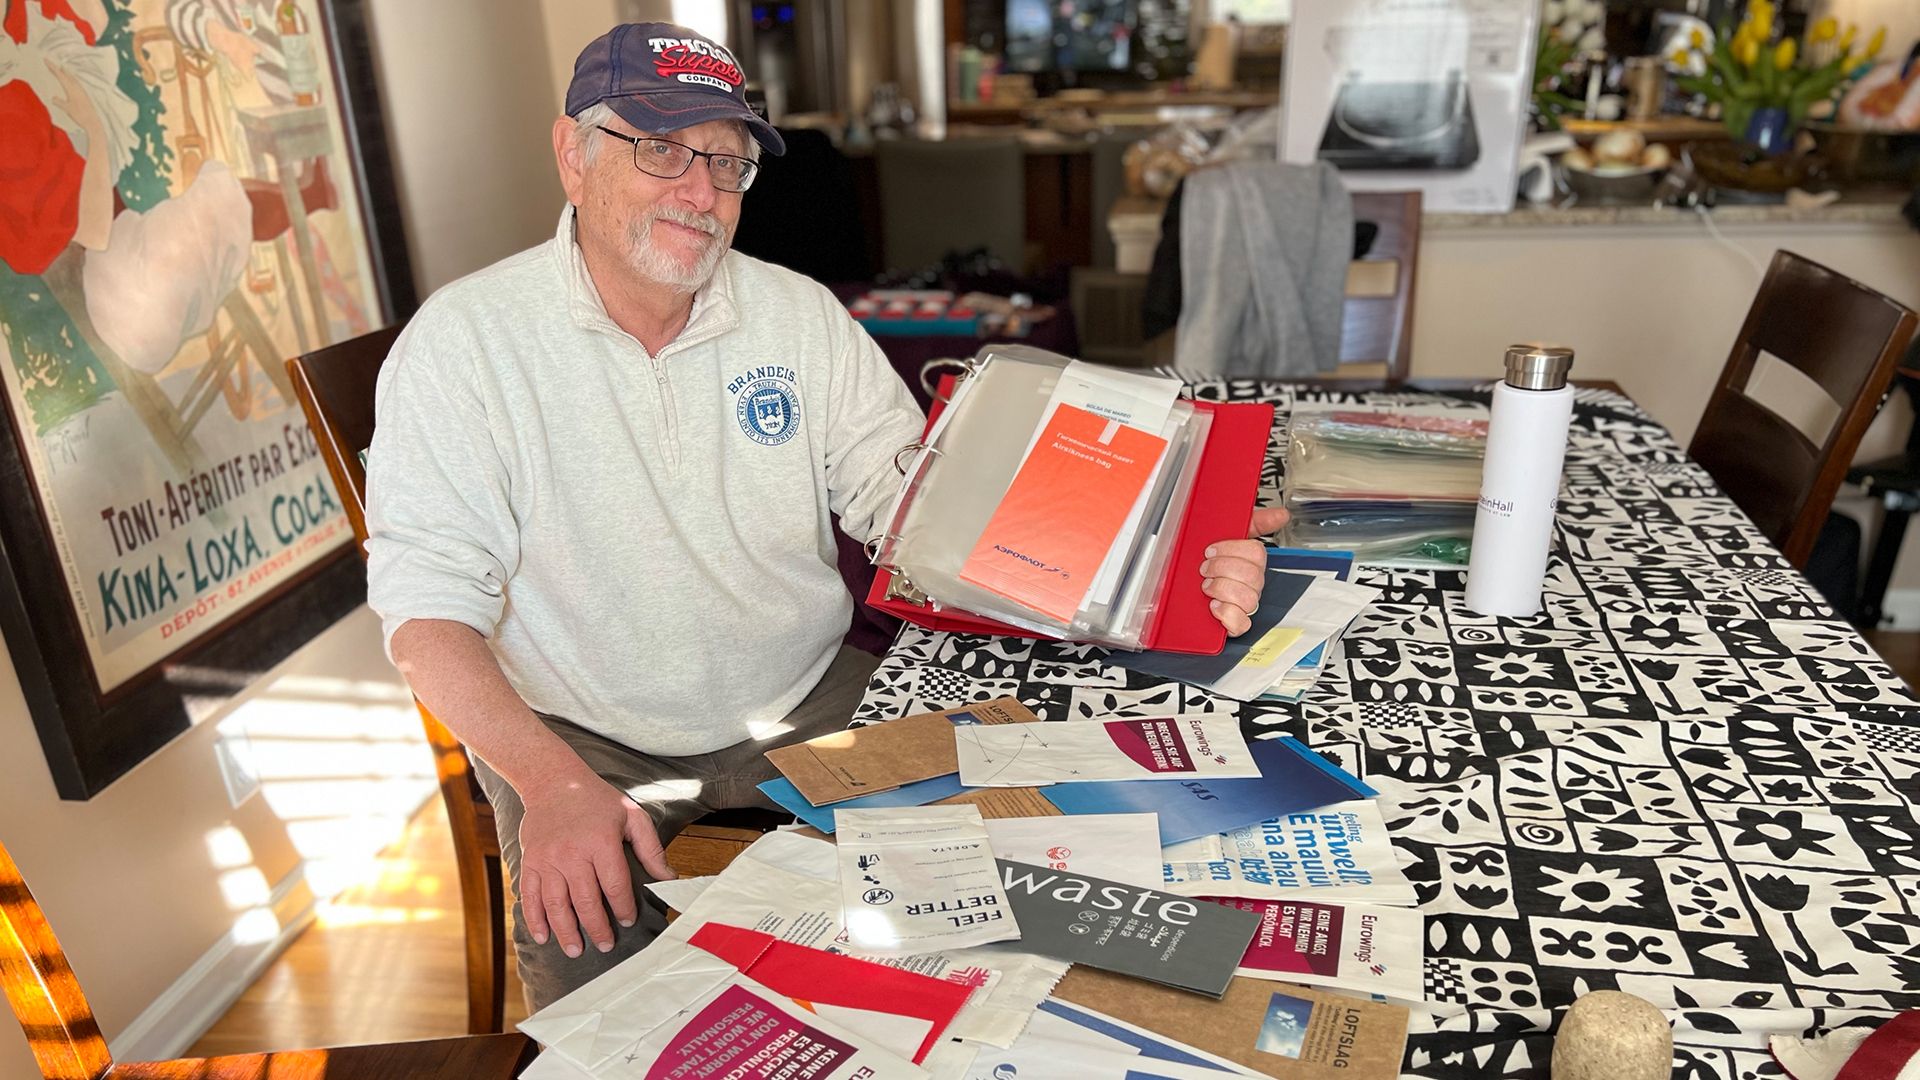 Lloyd Sobel and his collection of. air sickness bags.